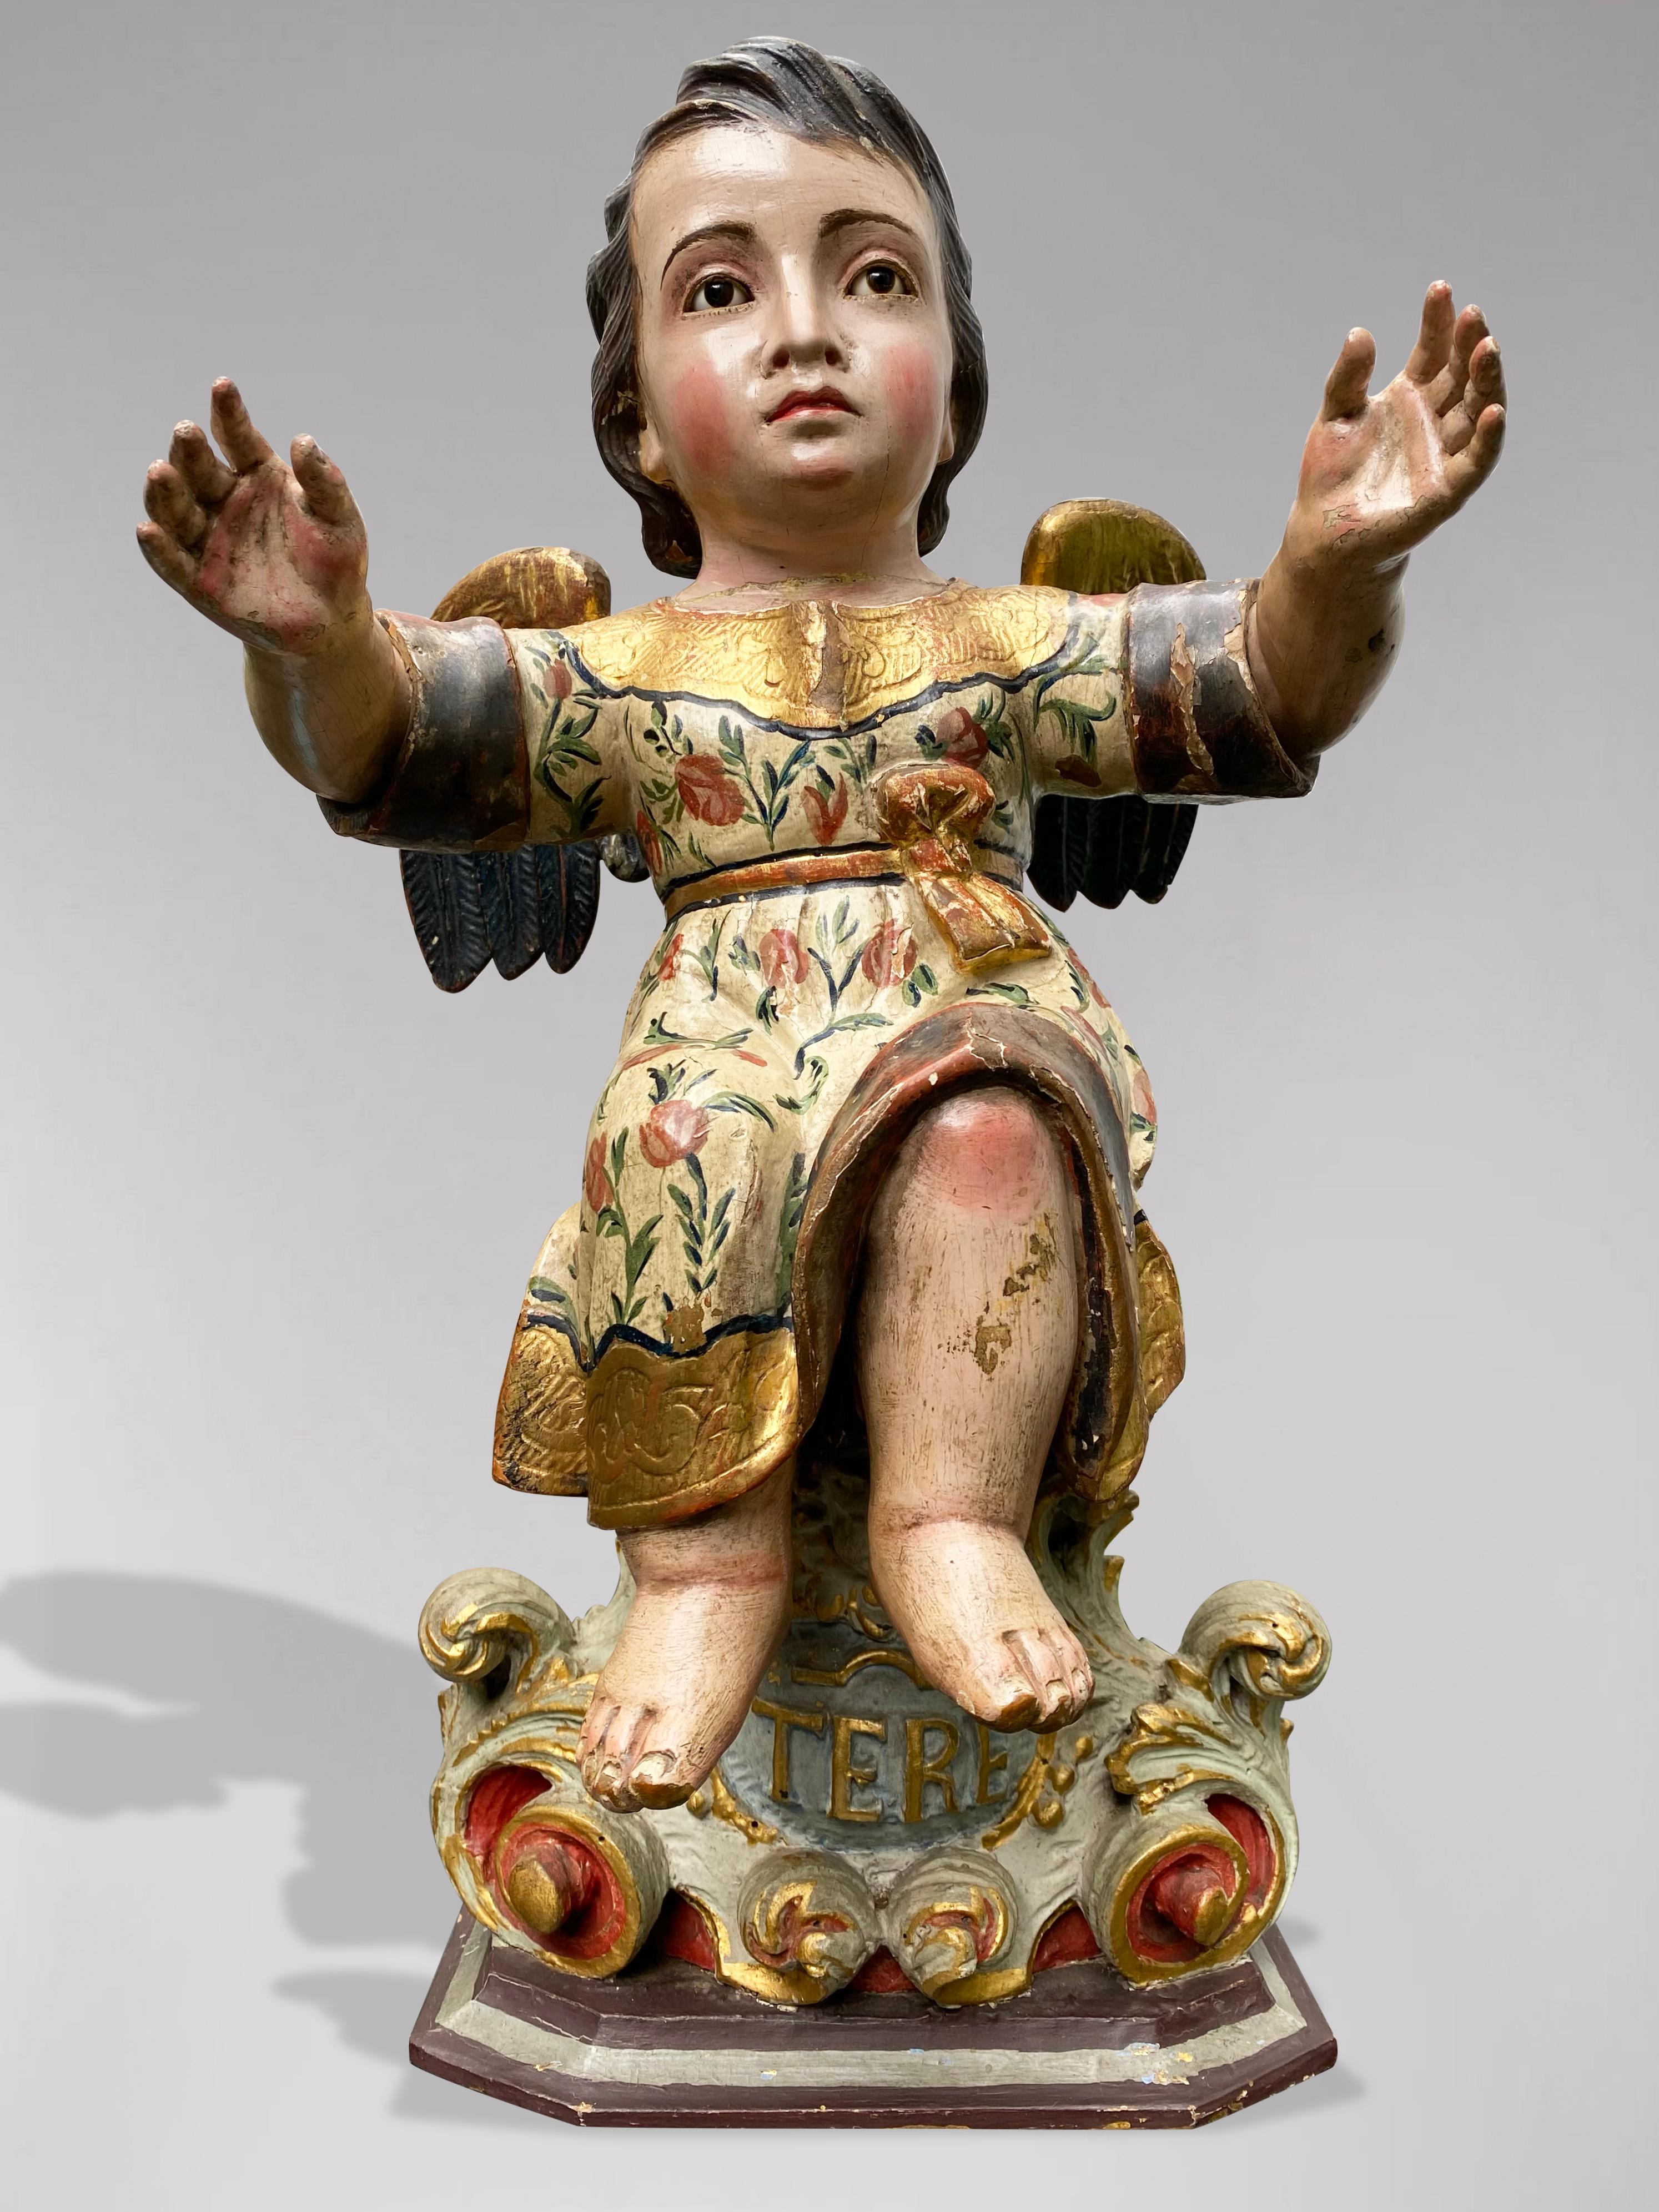 A Spanish Statue of a Sitting on a Pedestal Angel with Open Arms, Early 19th C